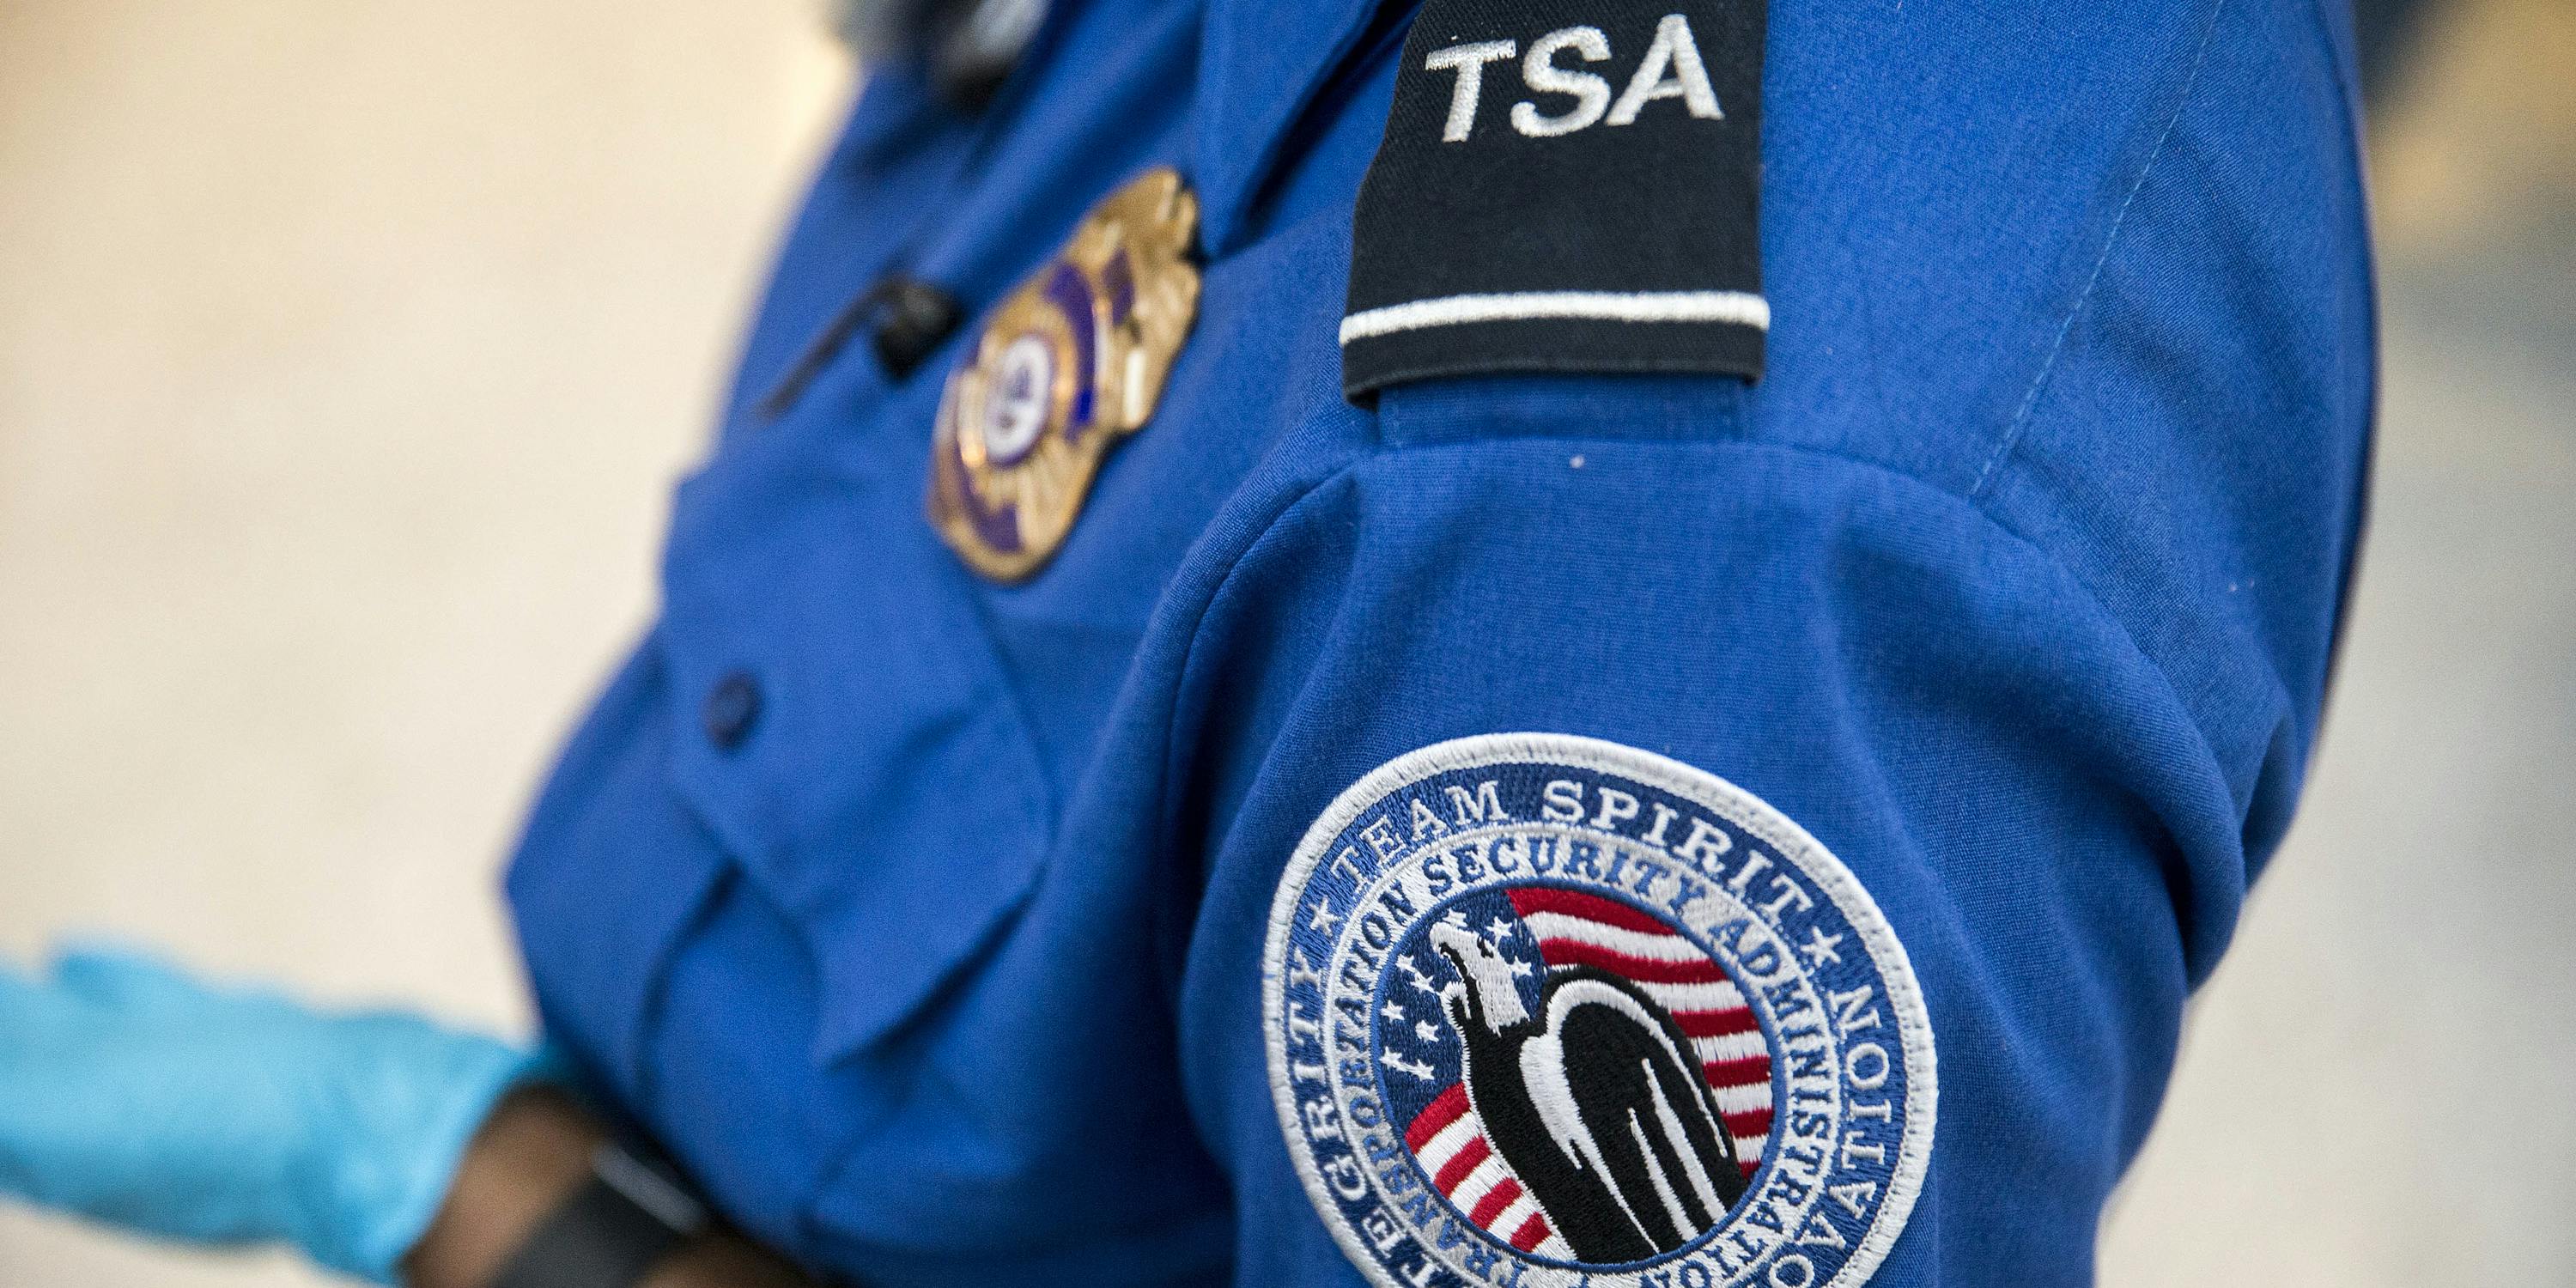 Dispensary Owner Flagged By TSA Airport Security Because He Works In Cannabis